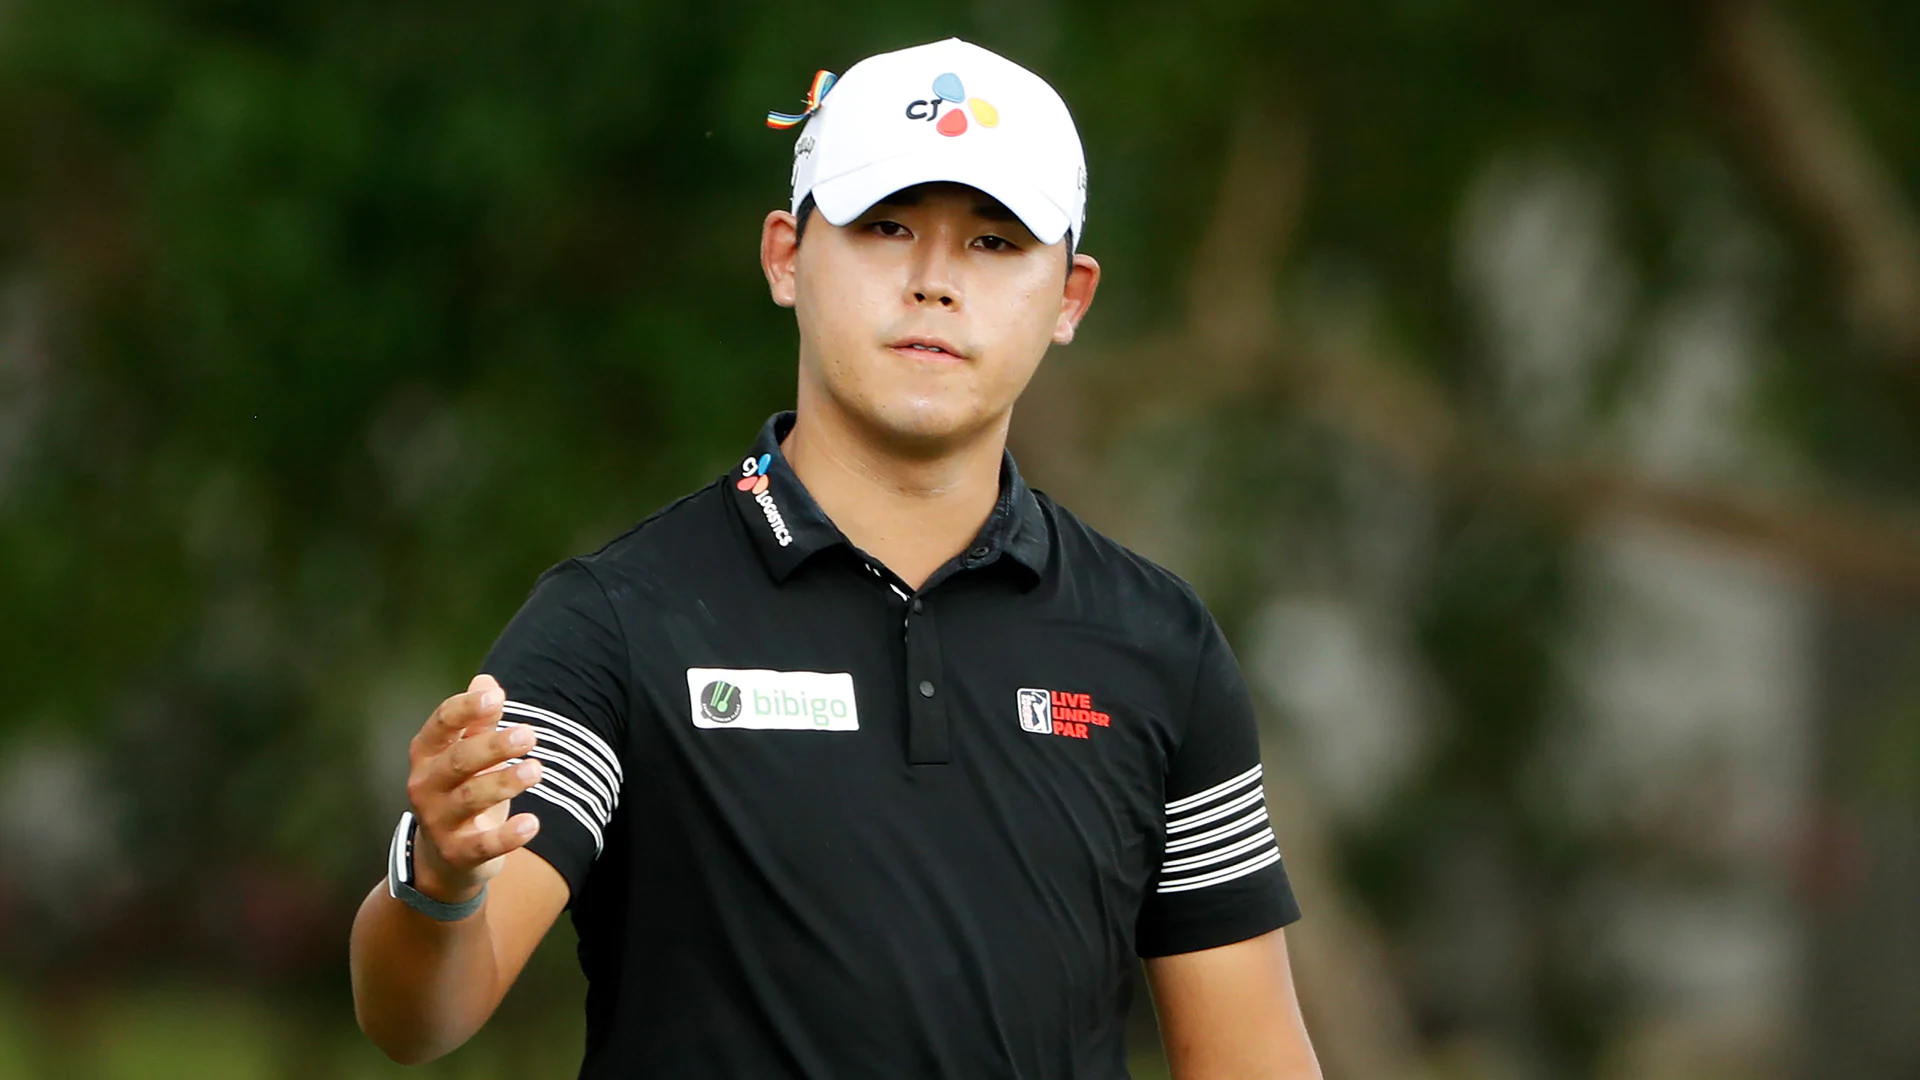 After almost carding a second ace, Si Woo Kim eyes a second Wyndham win